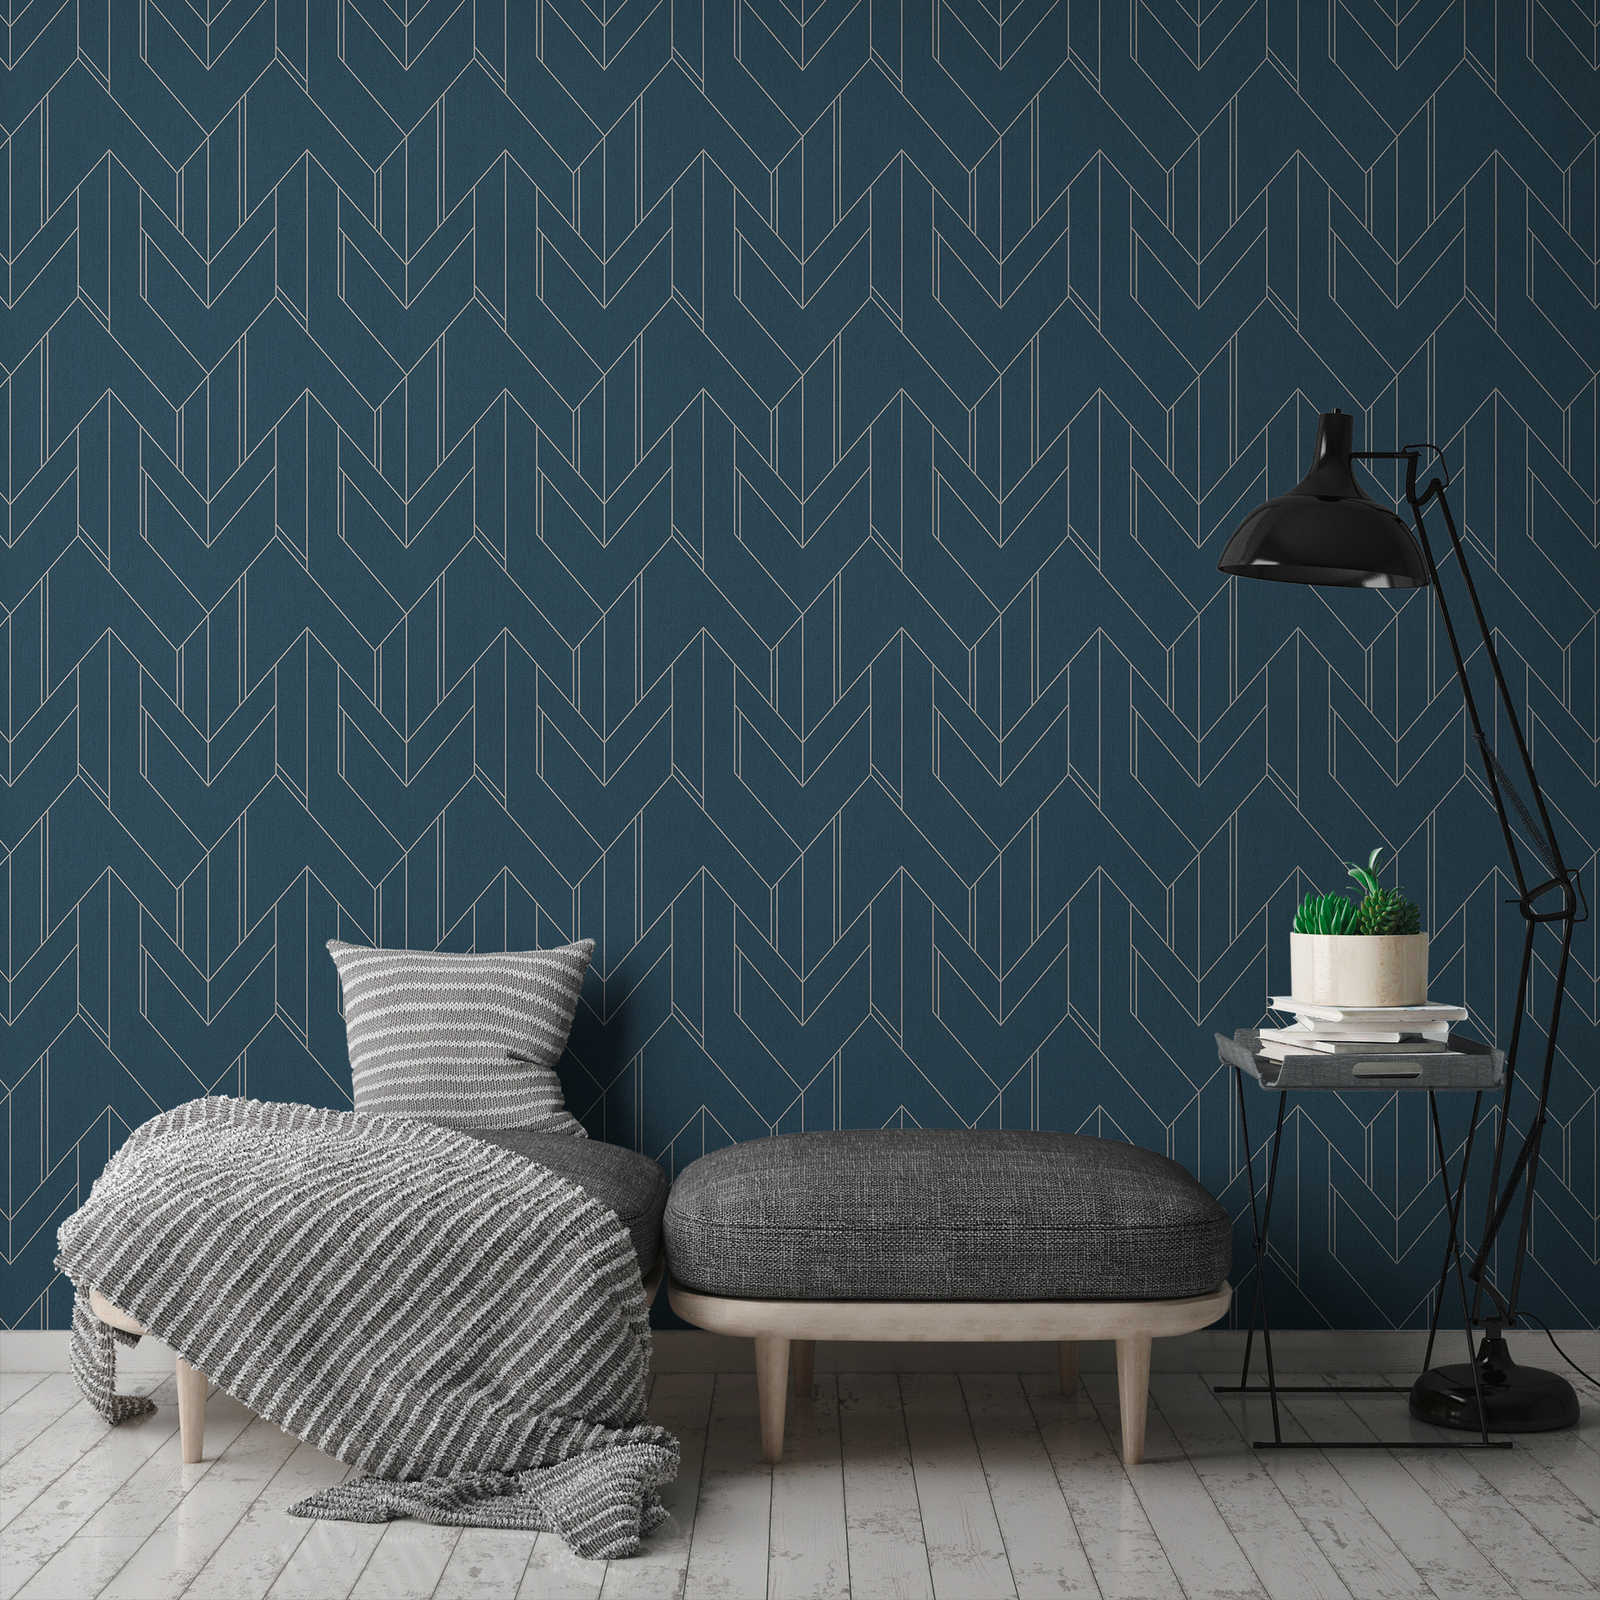             Dark blue wallpaper with silver graphic pattern & glossy effect - blue, metallic
        